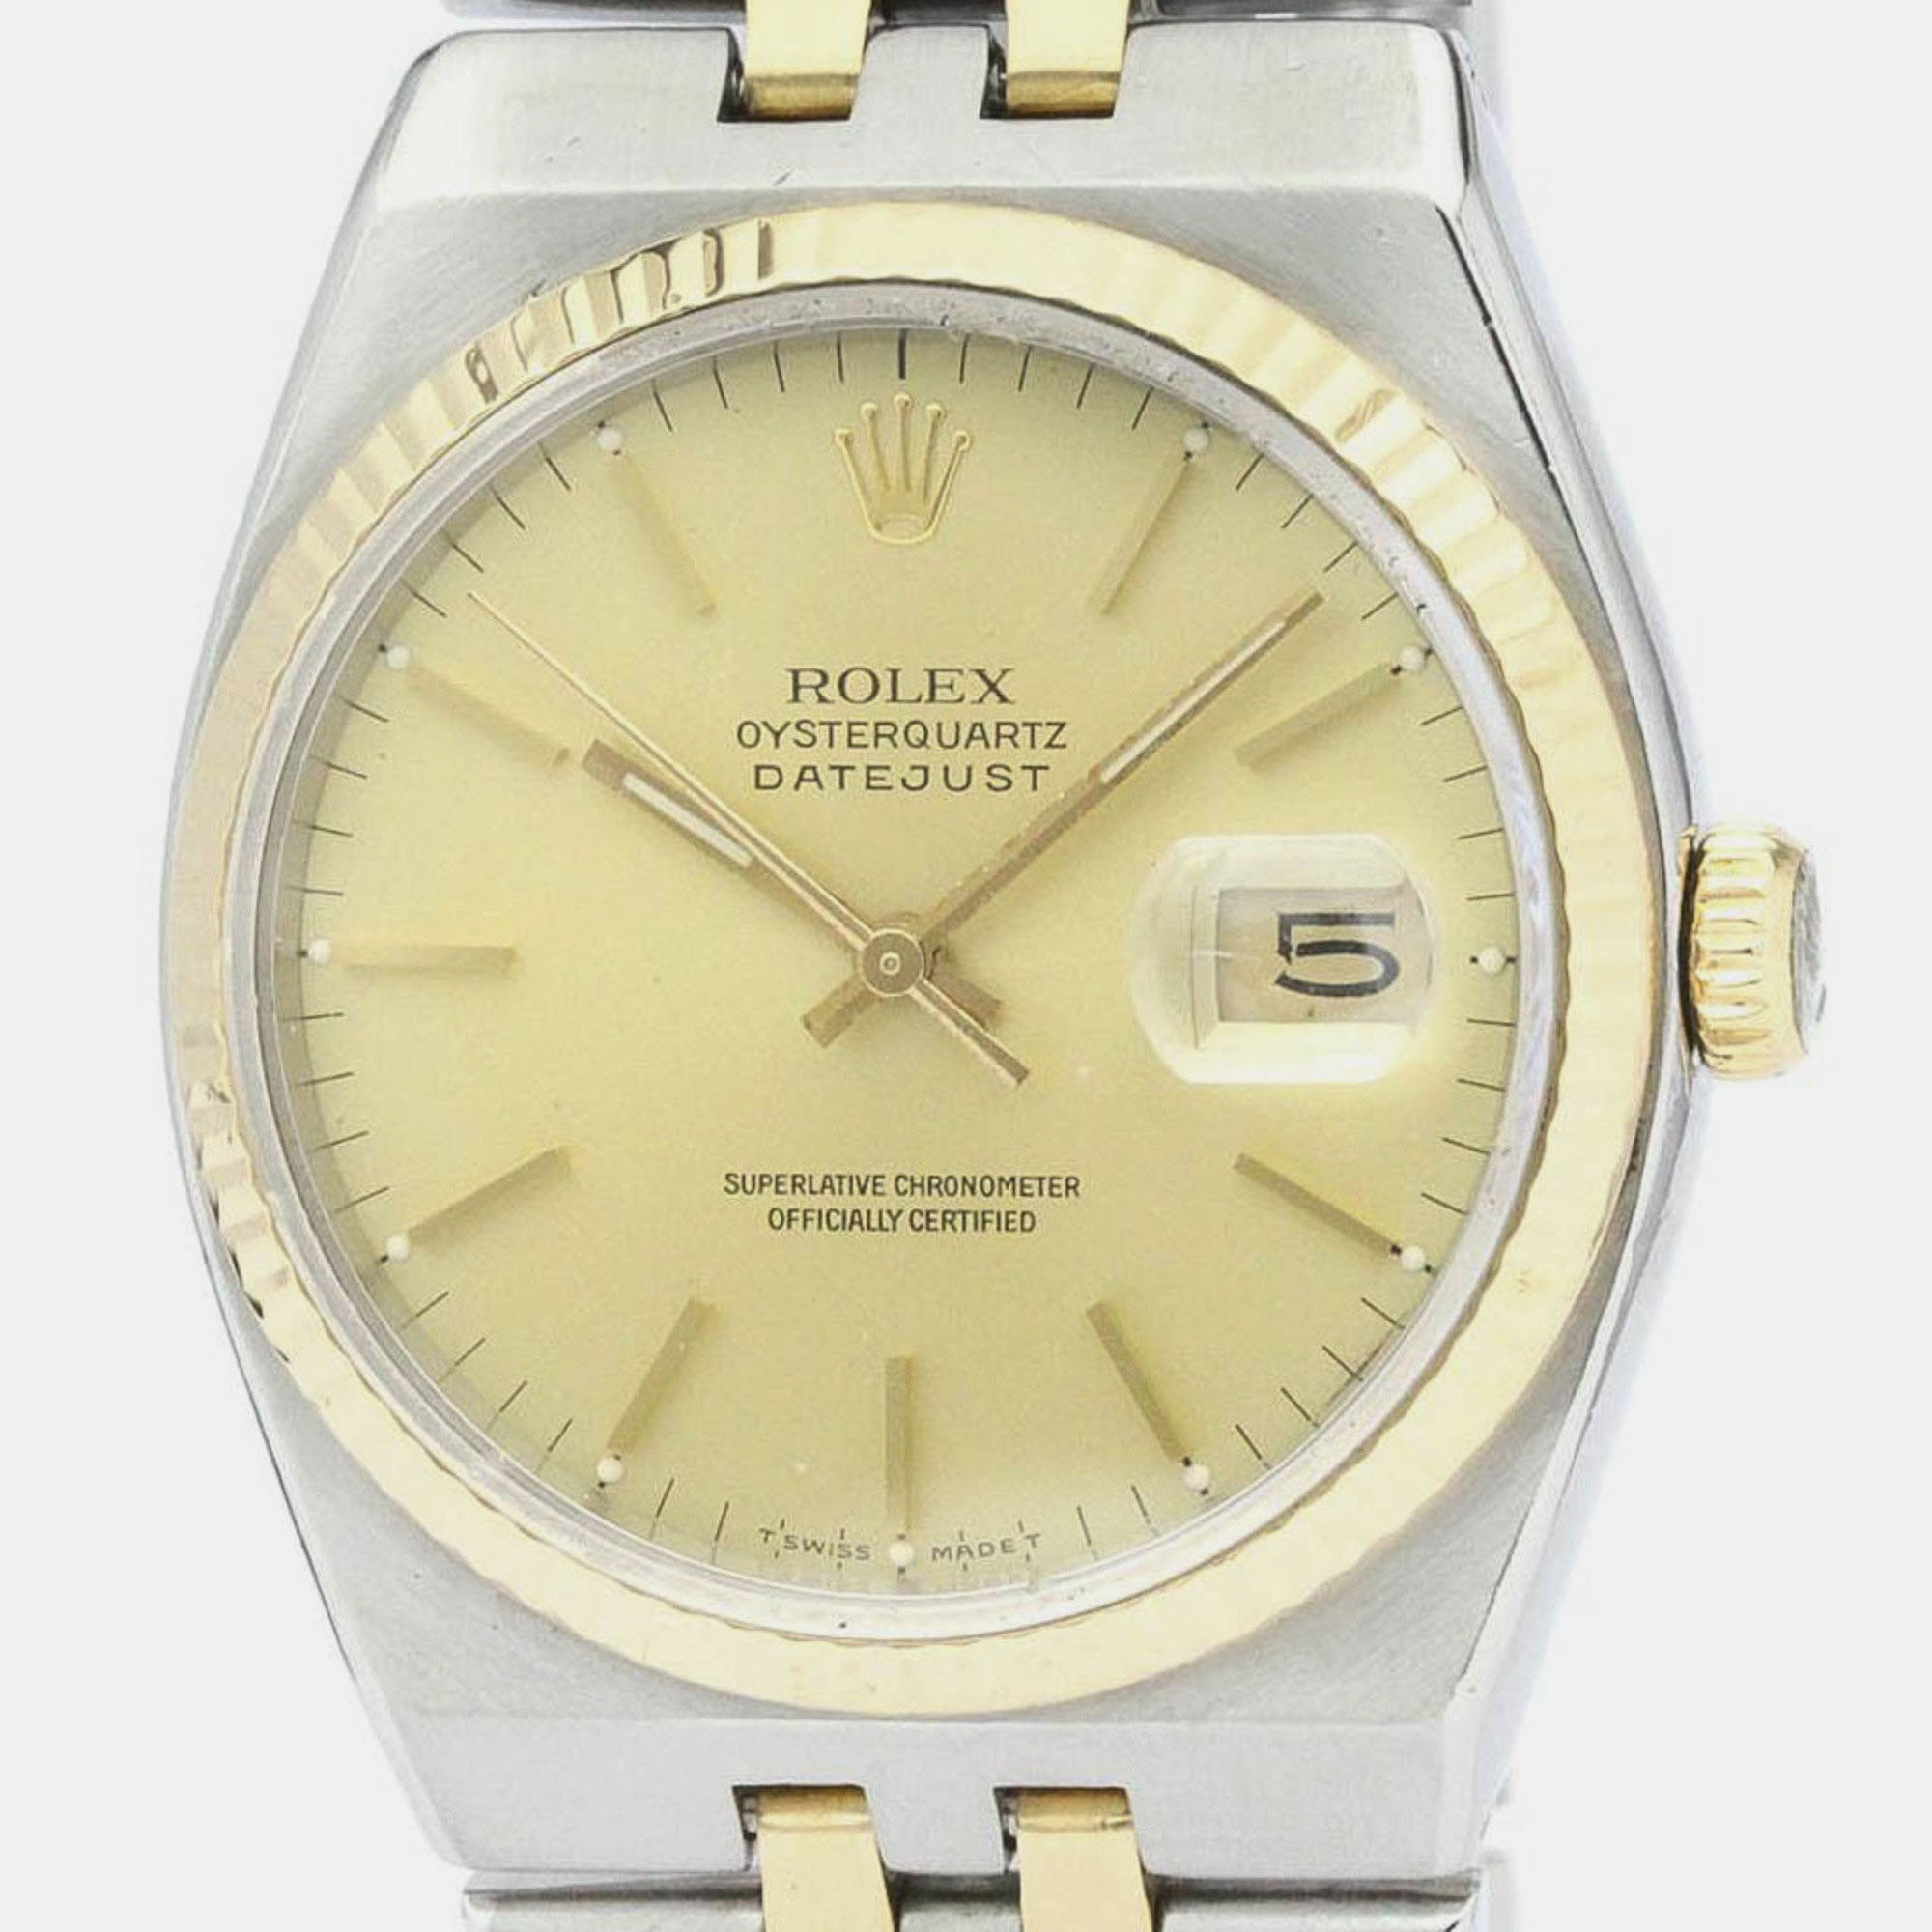 Rolex Gold 18k Yellow Gold And Stainless Steel Datejust 17013 Automatic Men's Wristwatch 36 Mm